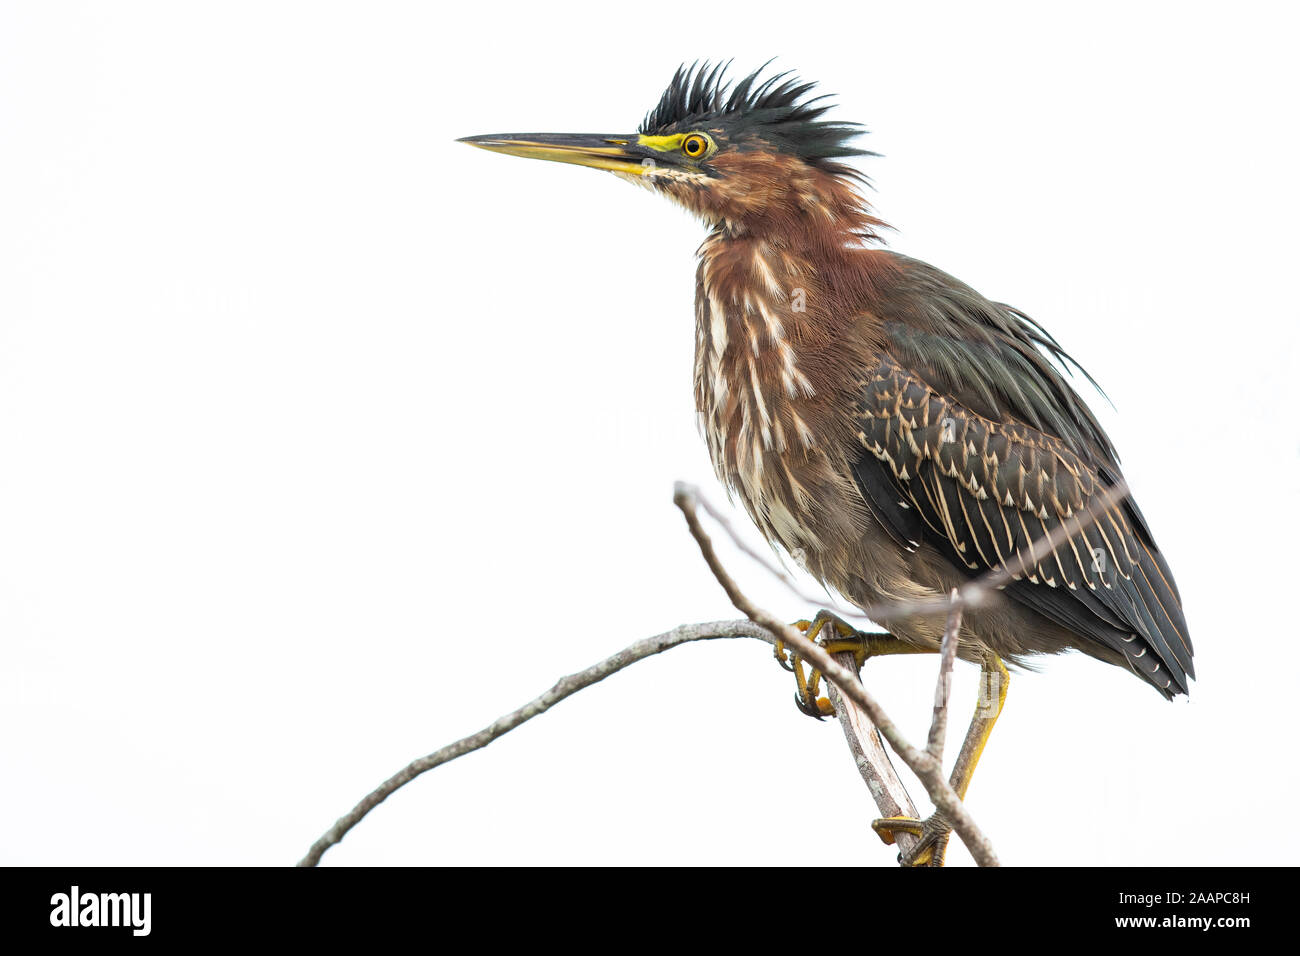 A green heron perched on a branch. Stock Photo